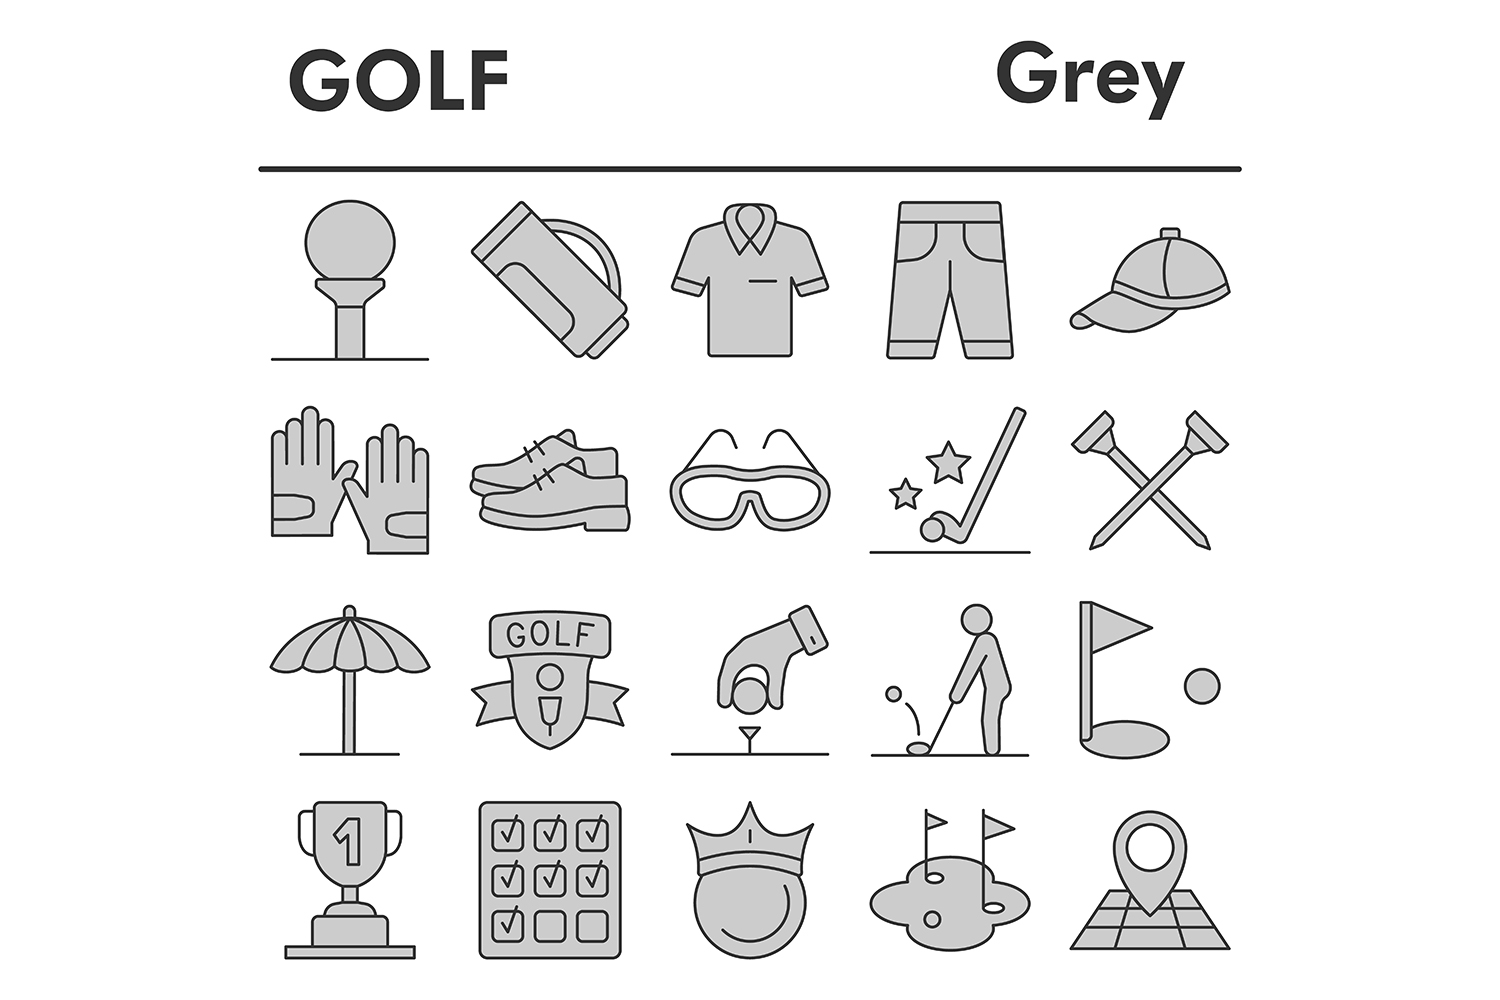 Golf icons set, gray style pinterest preview image.